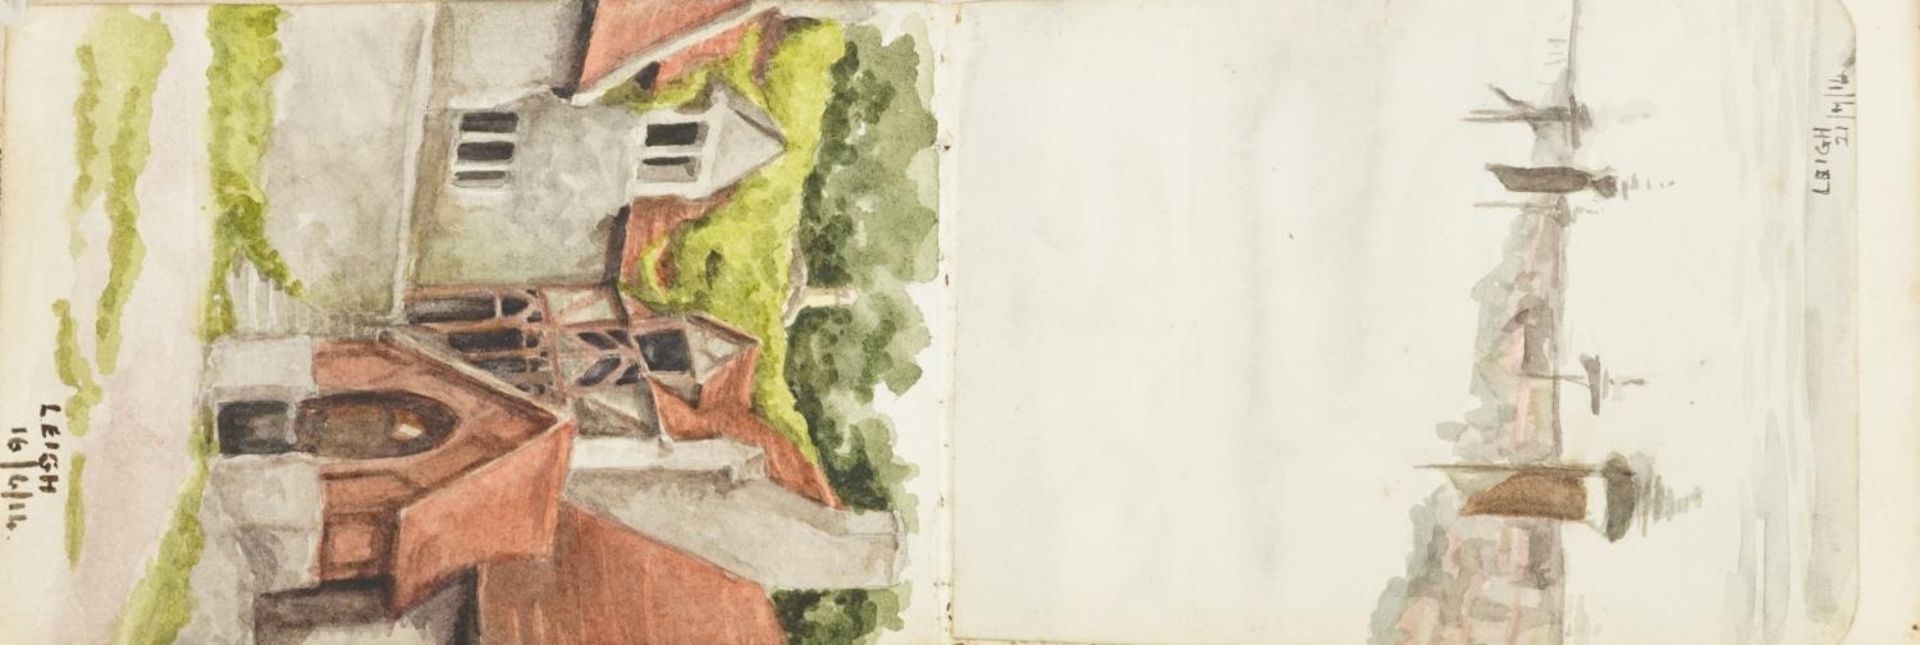 Early 20th century artist's travel sketchbook housing various watercolours and pencil sketches - Image 14 of 15